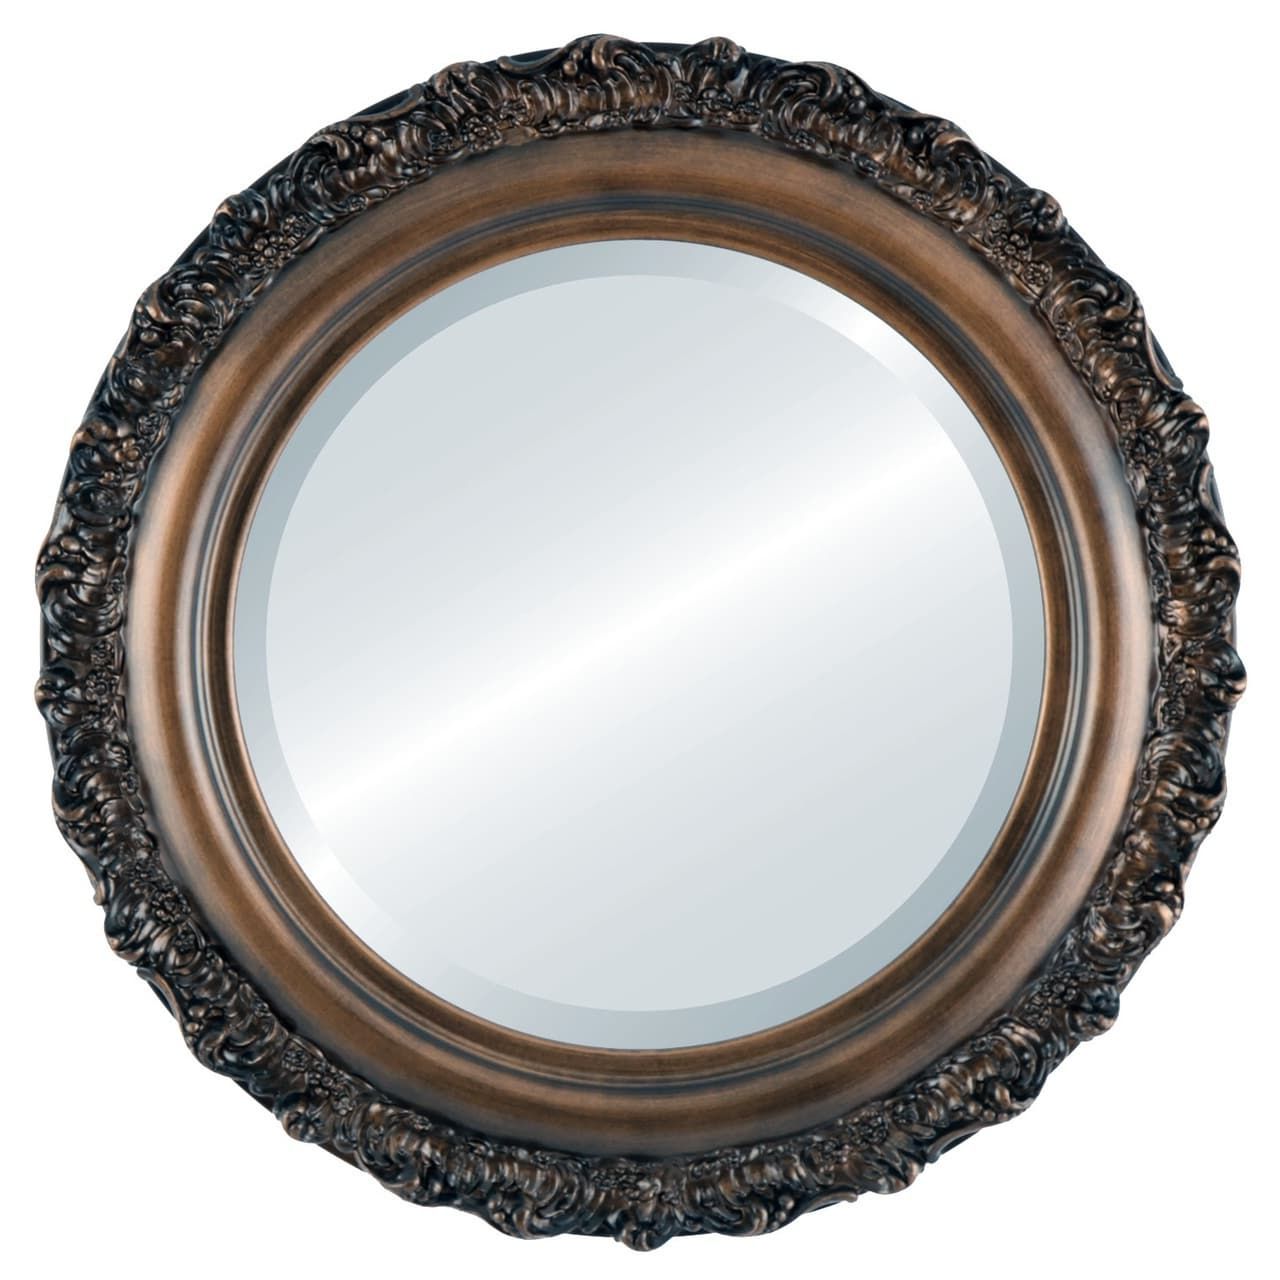 2020 Bronze Quatrefoil Wall Mirrors Intended For The Oval And Round Mirror Store Venice Framed Round Mirror In Rubbed (View 2 of 15)